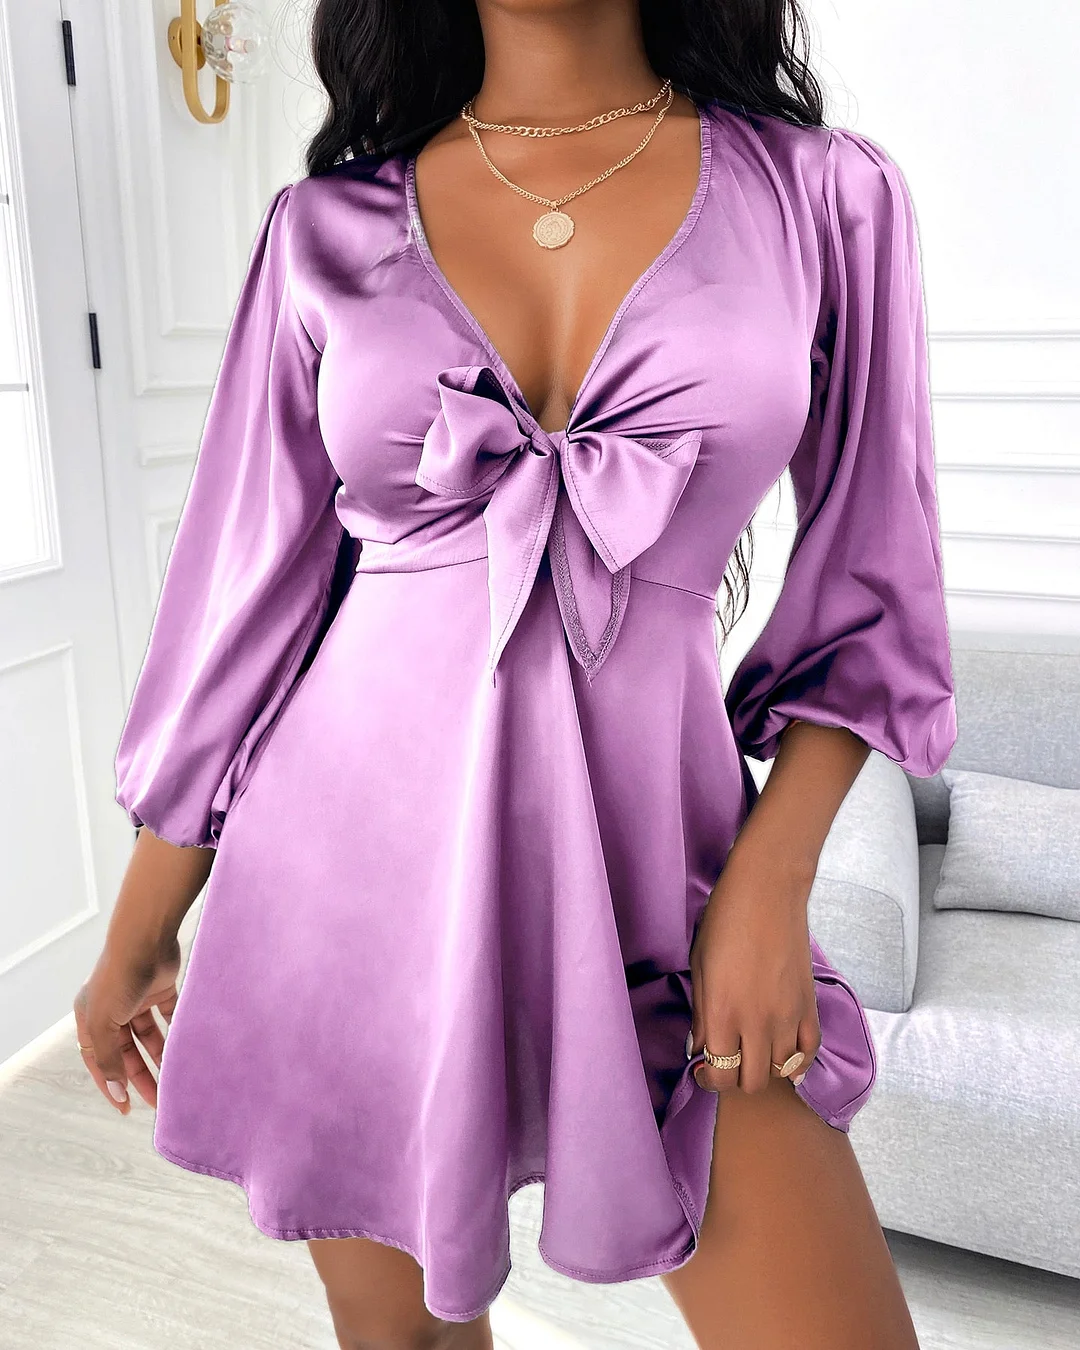 2022 Women's Mini Satin Puff Sleeve Plunge Tie Front Dress Solid Bow Summer Spring Party Casual Chic Sexy V Neck Dress